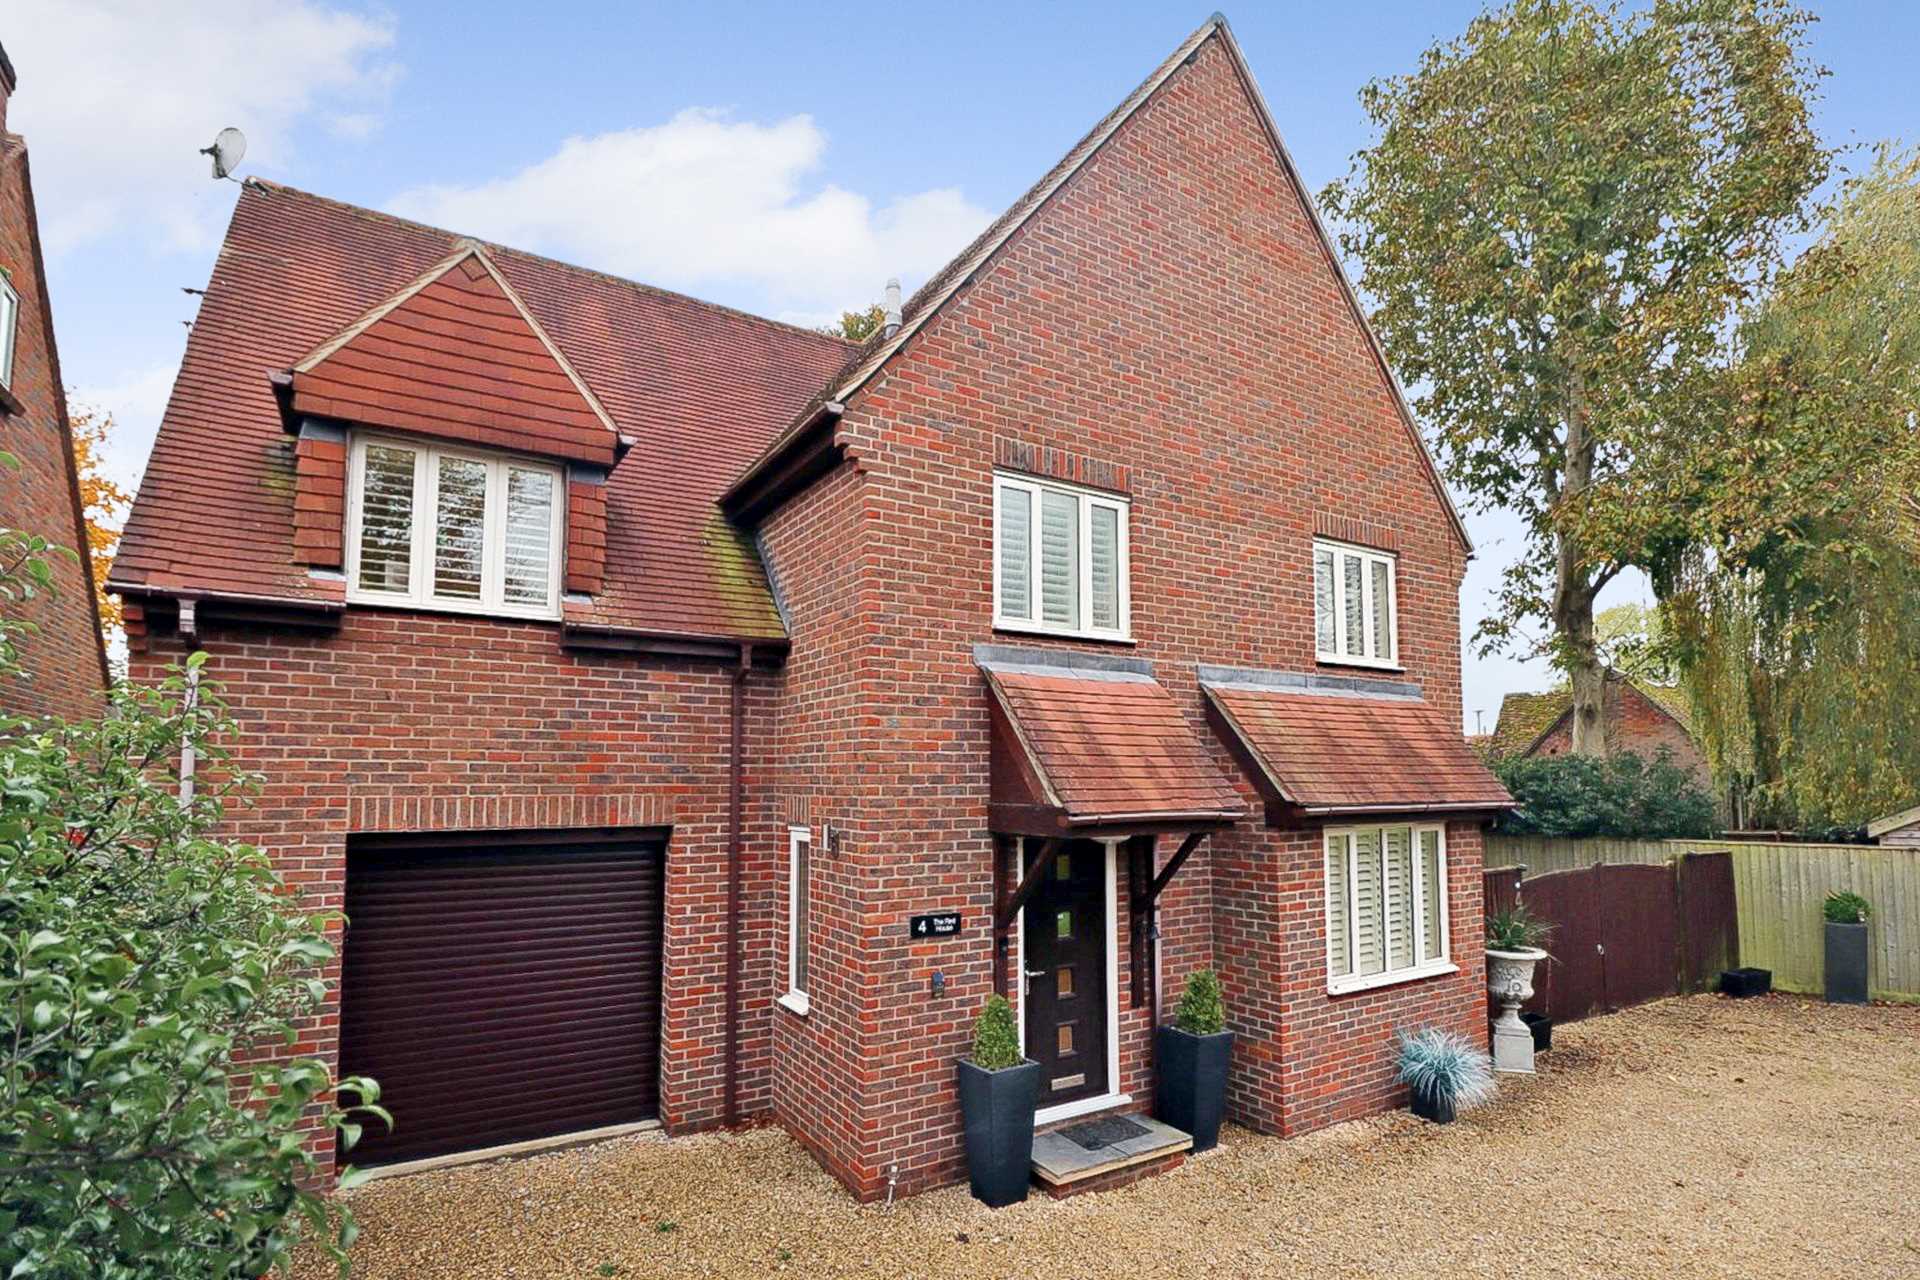 4 bed detached house for sale in Whatcombe Lane, Winterborne Whitechurch, Blandford Forum 0